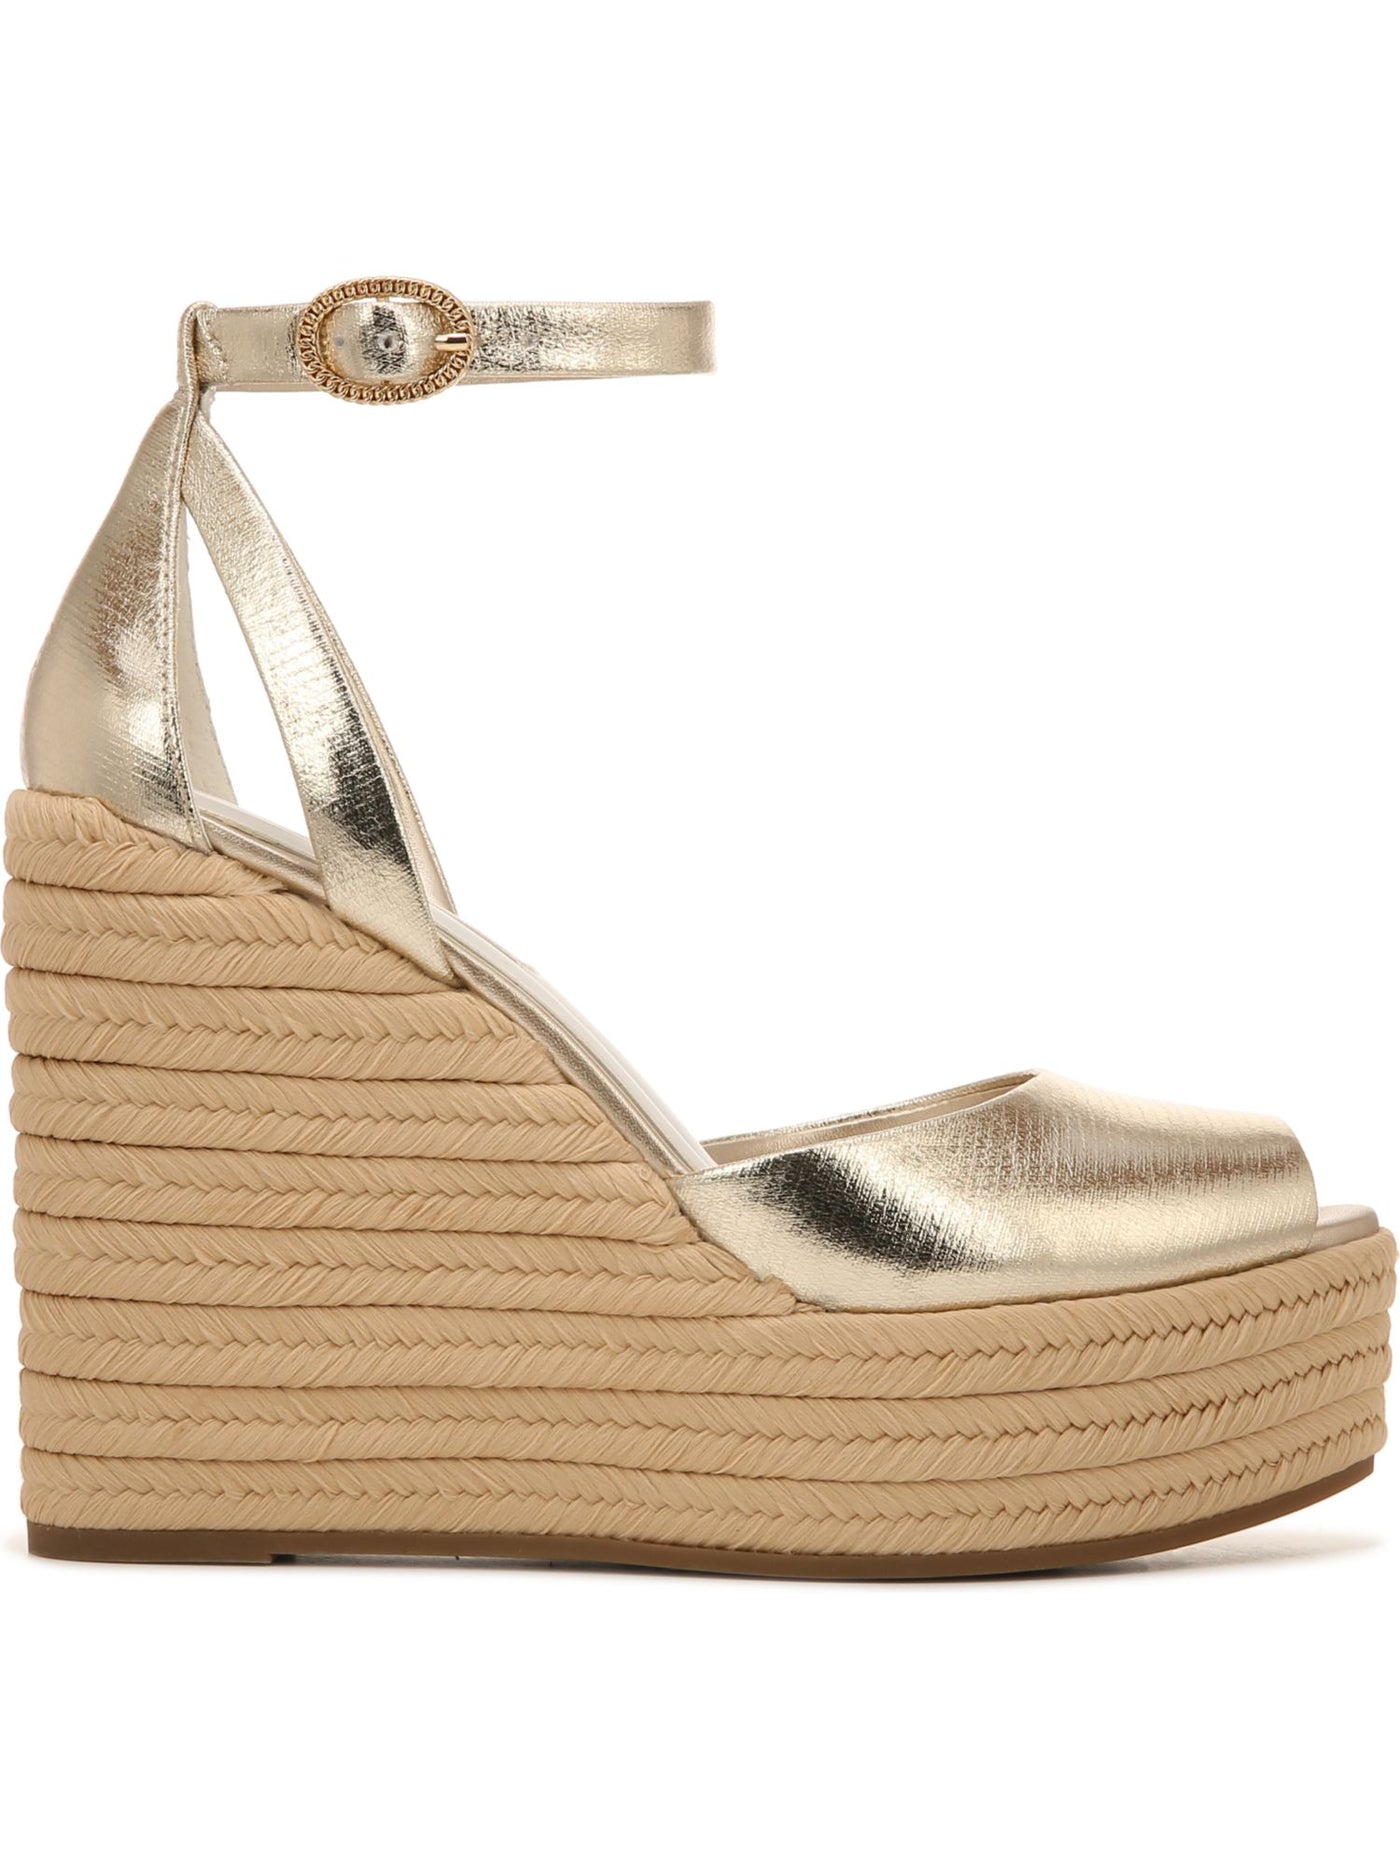 FRANCO SARTO Womens Gold 1-1/2" Platform Cut Out Ankle Strap Padded Paige Almond Toe Wedge Buckle Espadrille Shoes 10 M